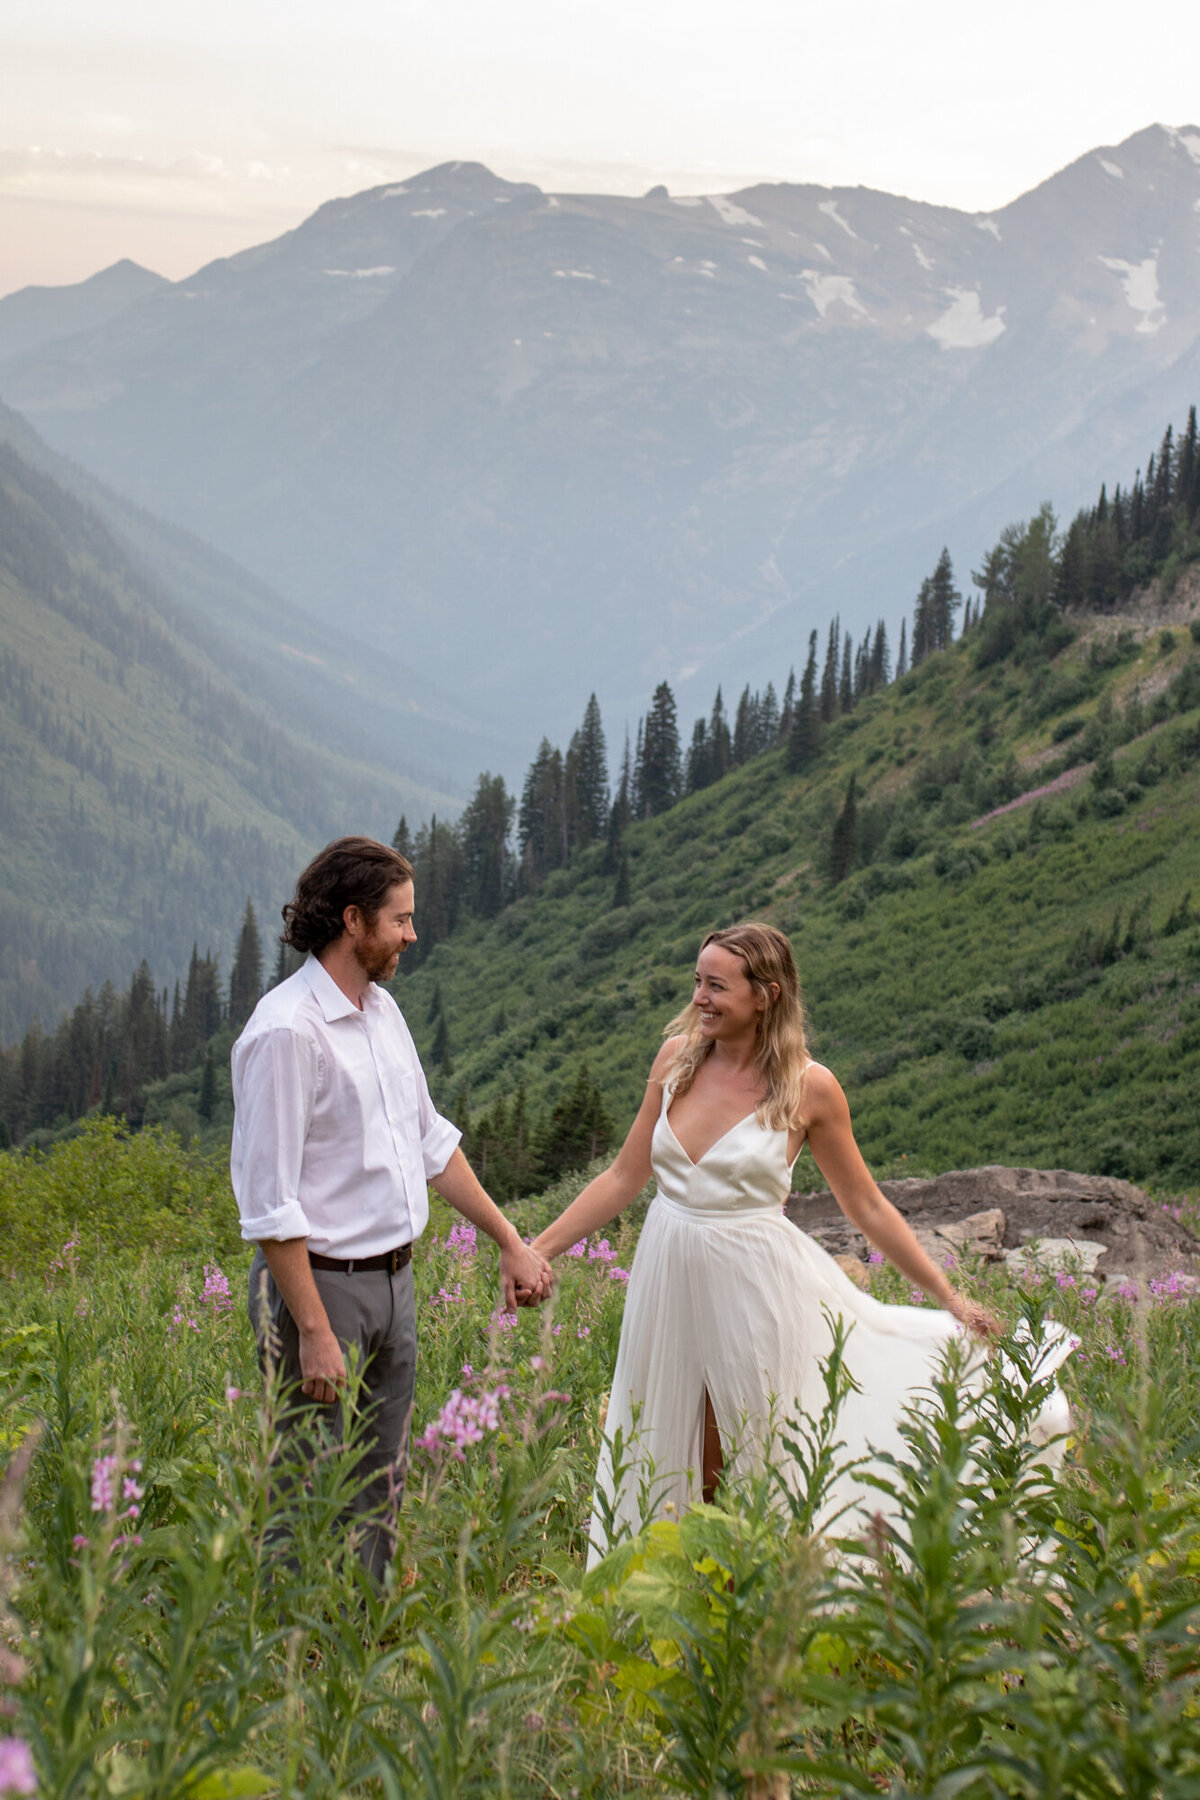 A bride and groom stand holding hands in a field of flowers in Glacier National Park.